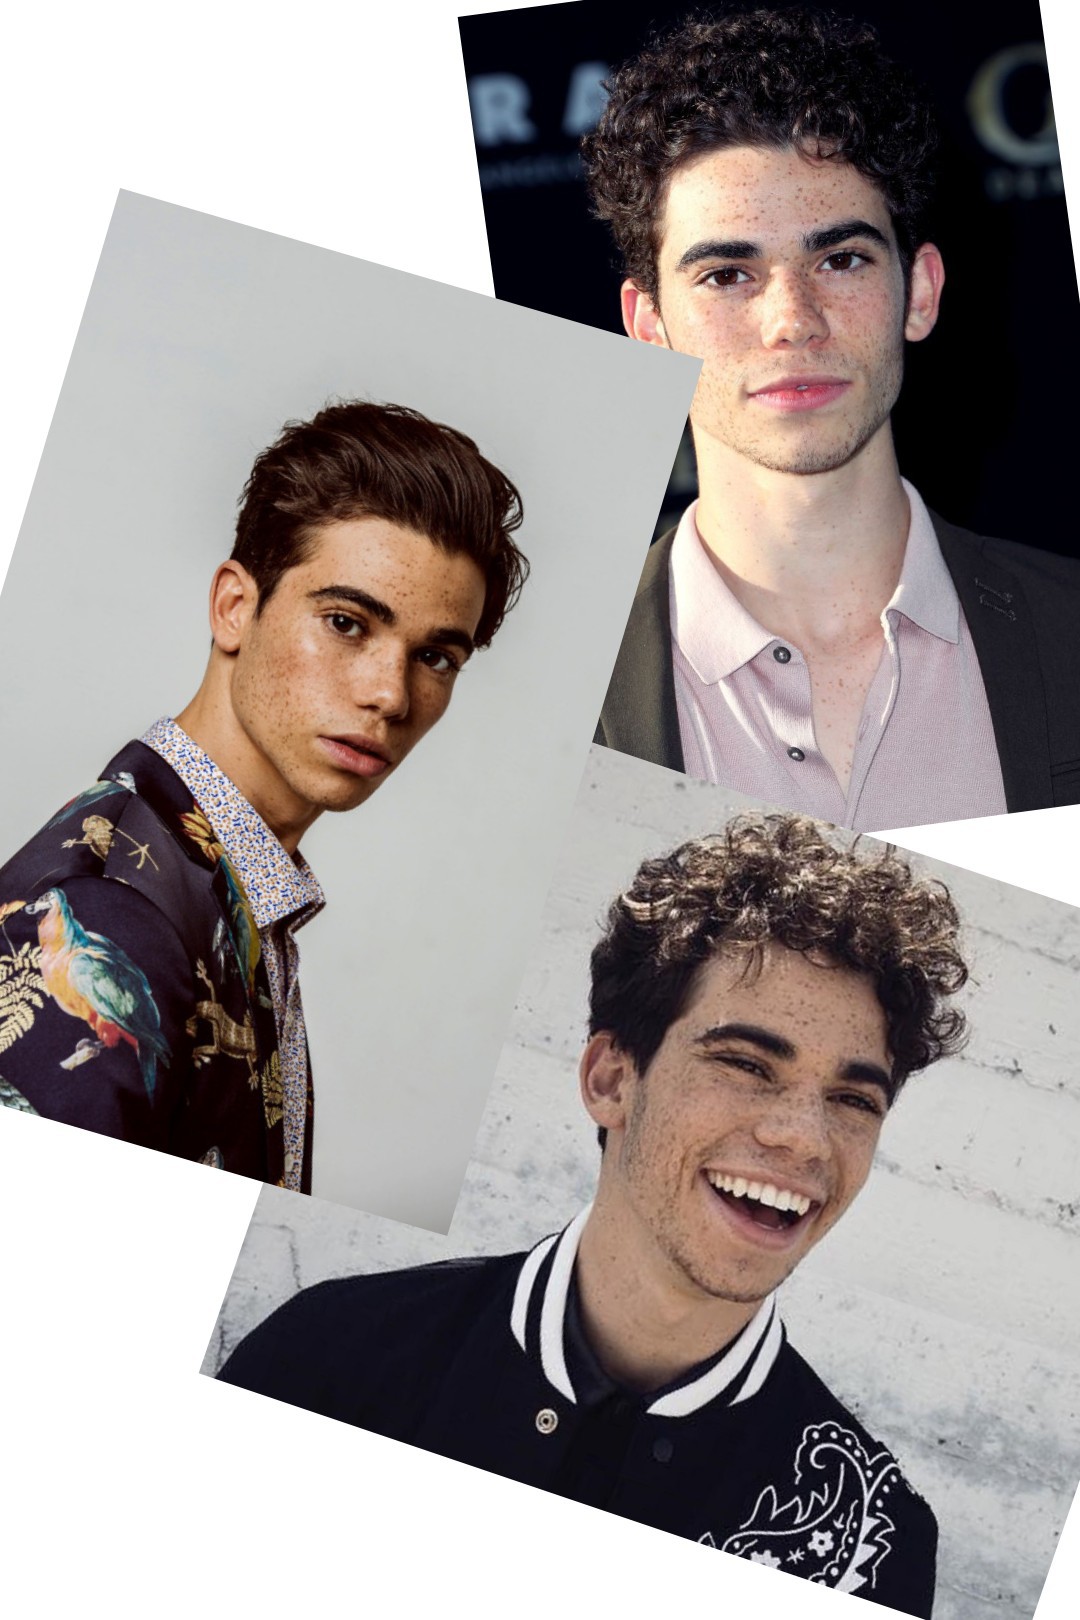                        tap
RIP to Cameron Boyce we all live you so much.😥😭